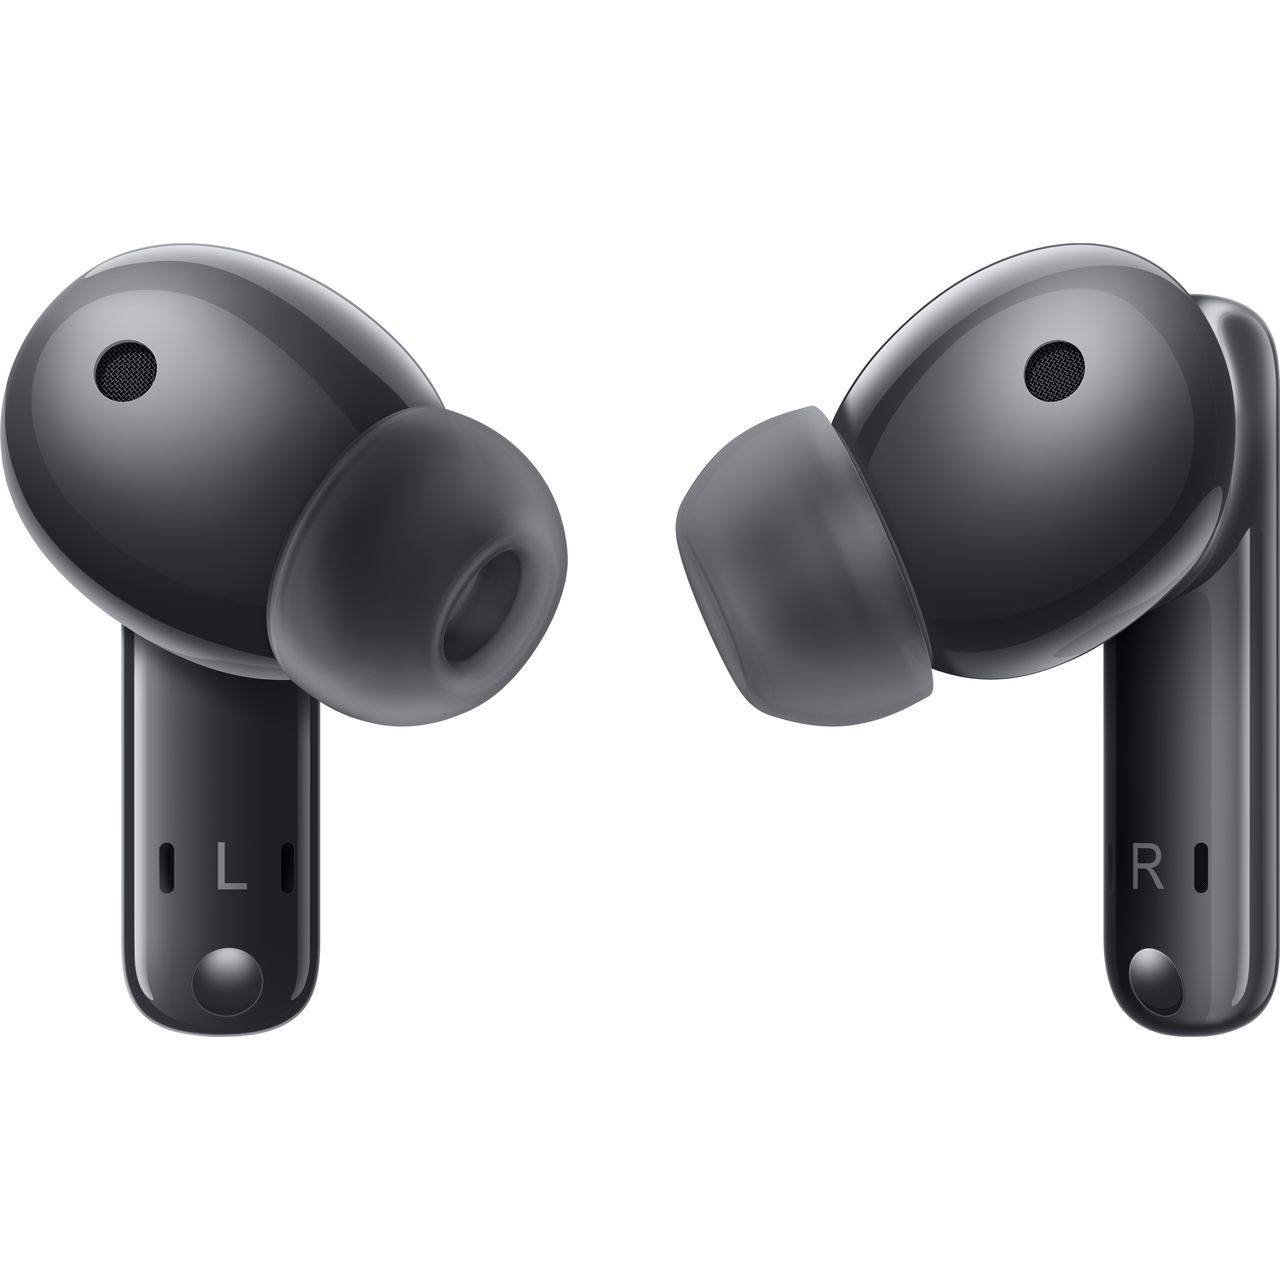 Huawei FreeBuds 5i In-Ear Earbuds with Built-in Microphone - Nebula Black, Best price in Egypt